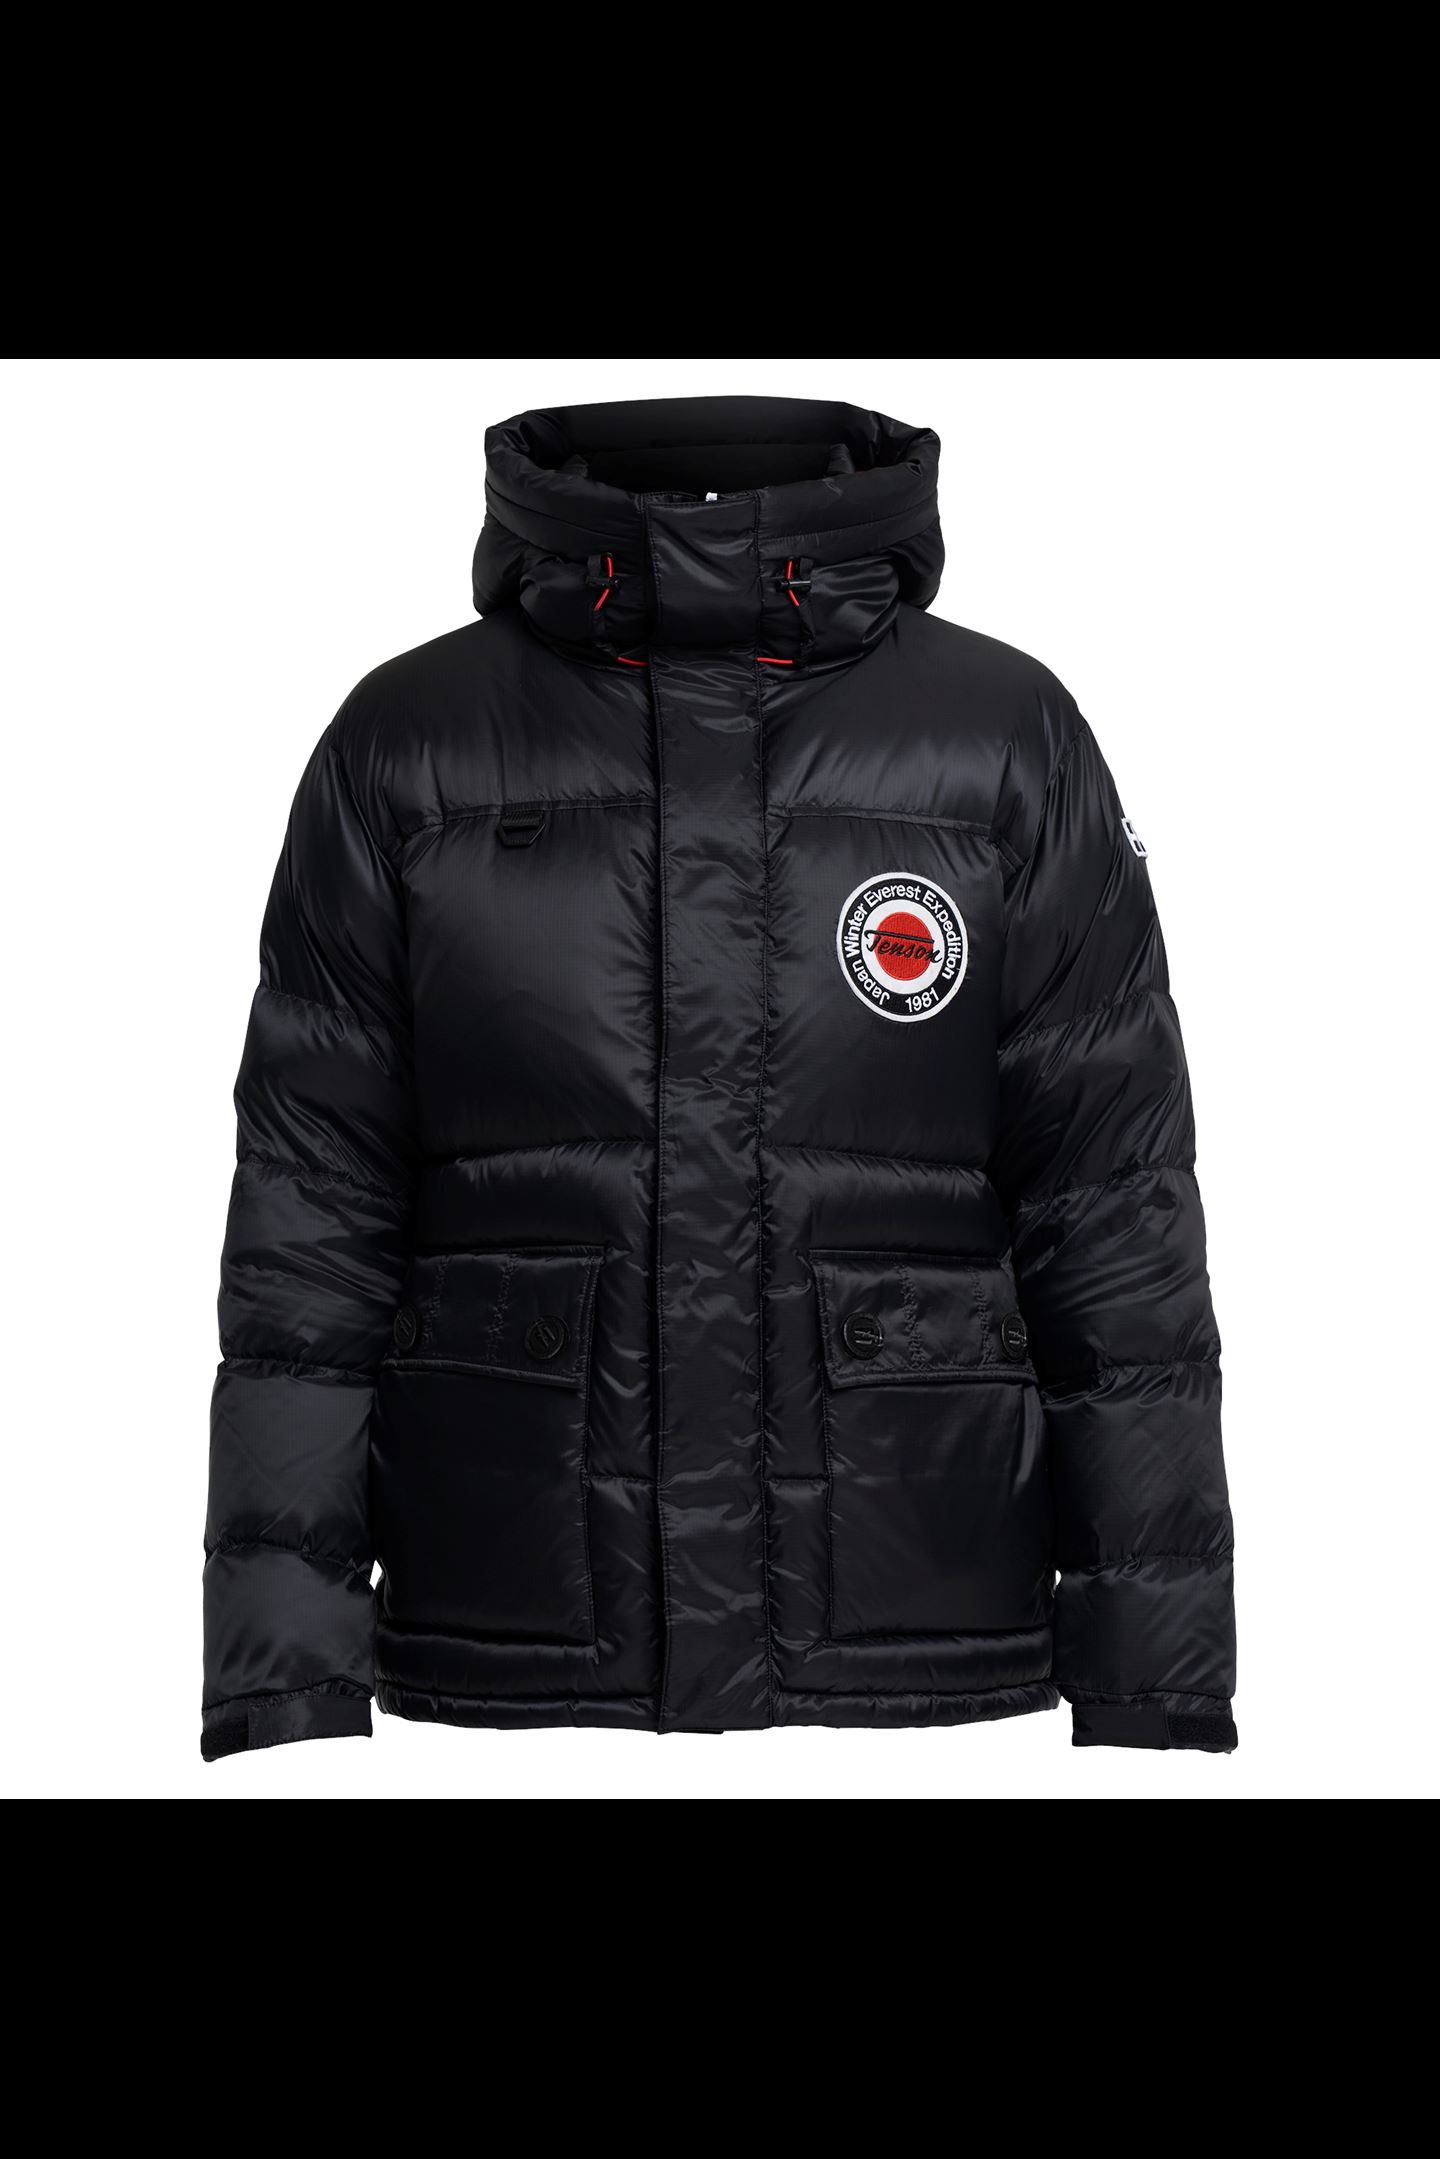 Expedition down parka in black - Canada Goose